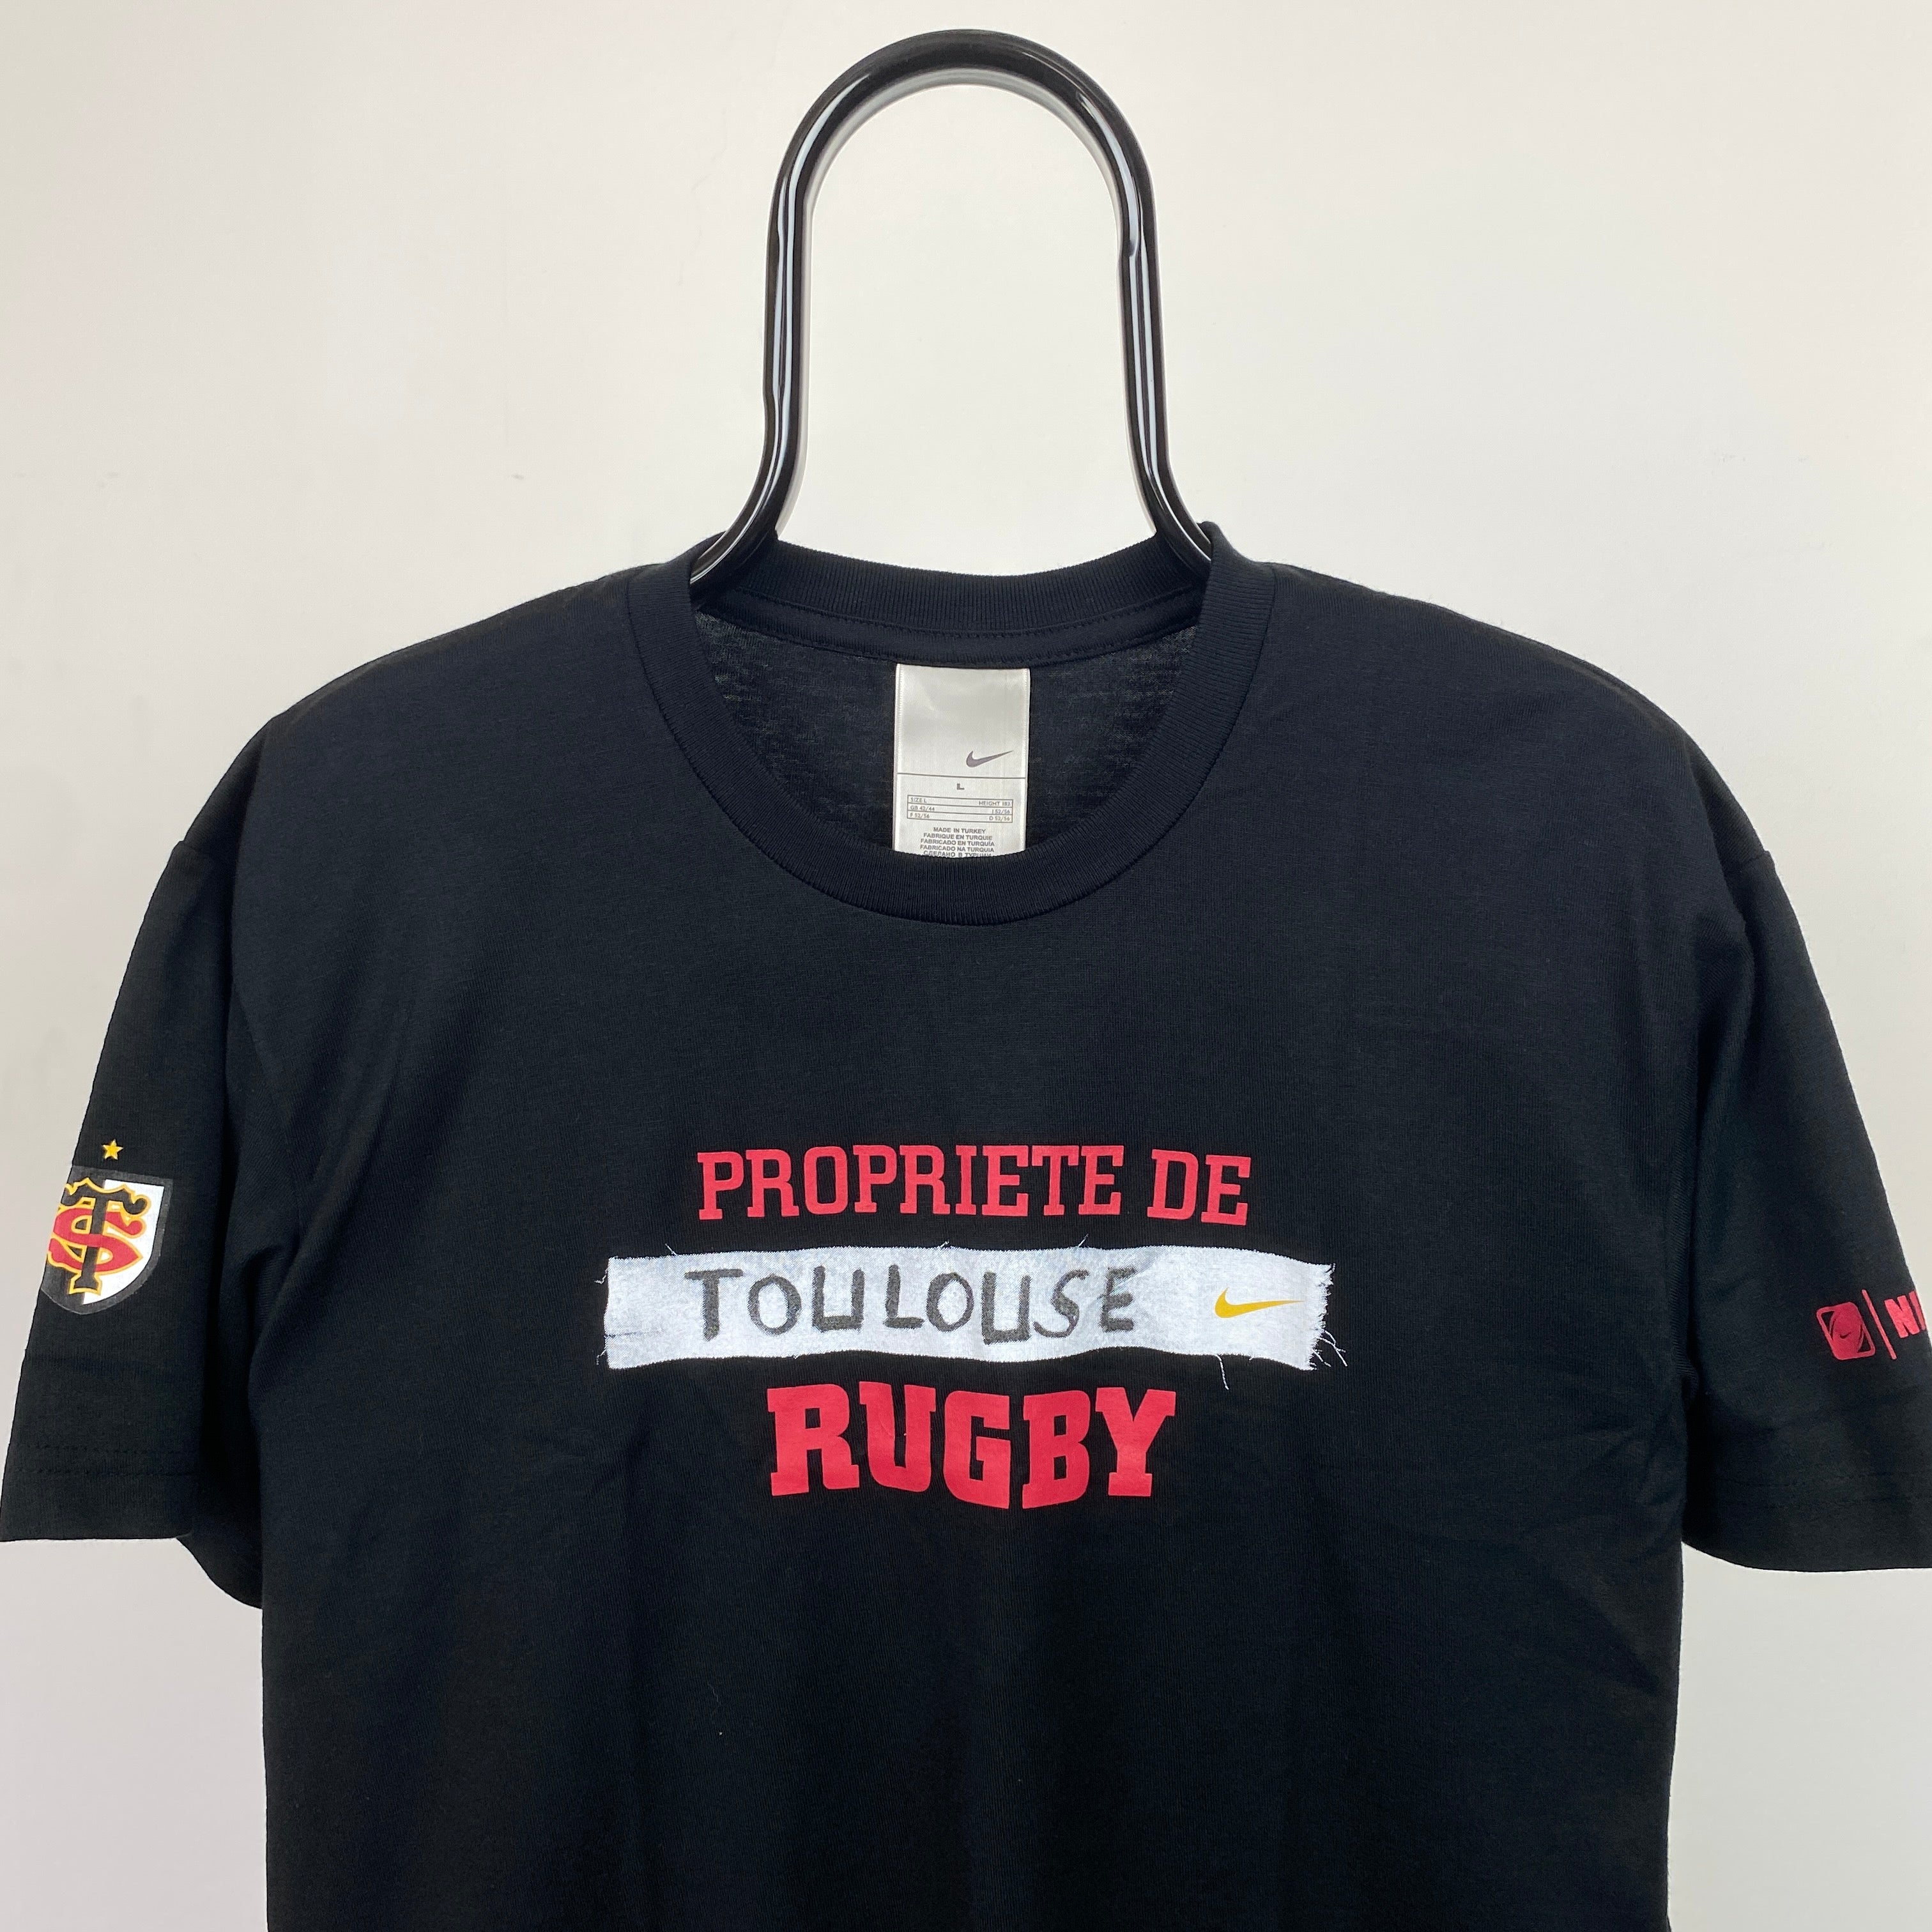 00s Nike Toulouse Rugby T-Shirt Black Small